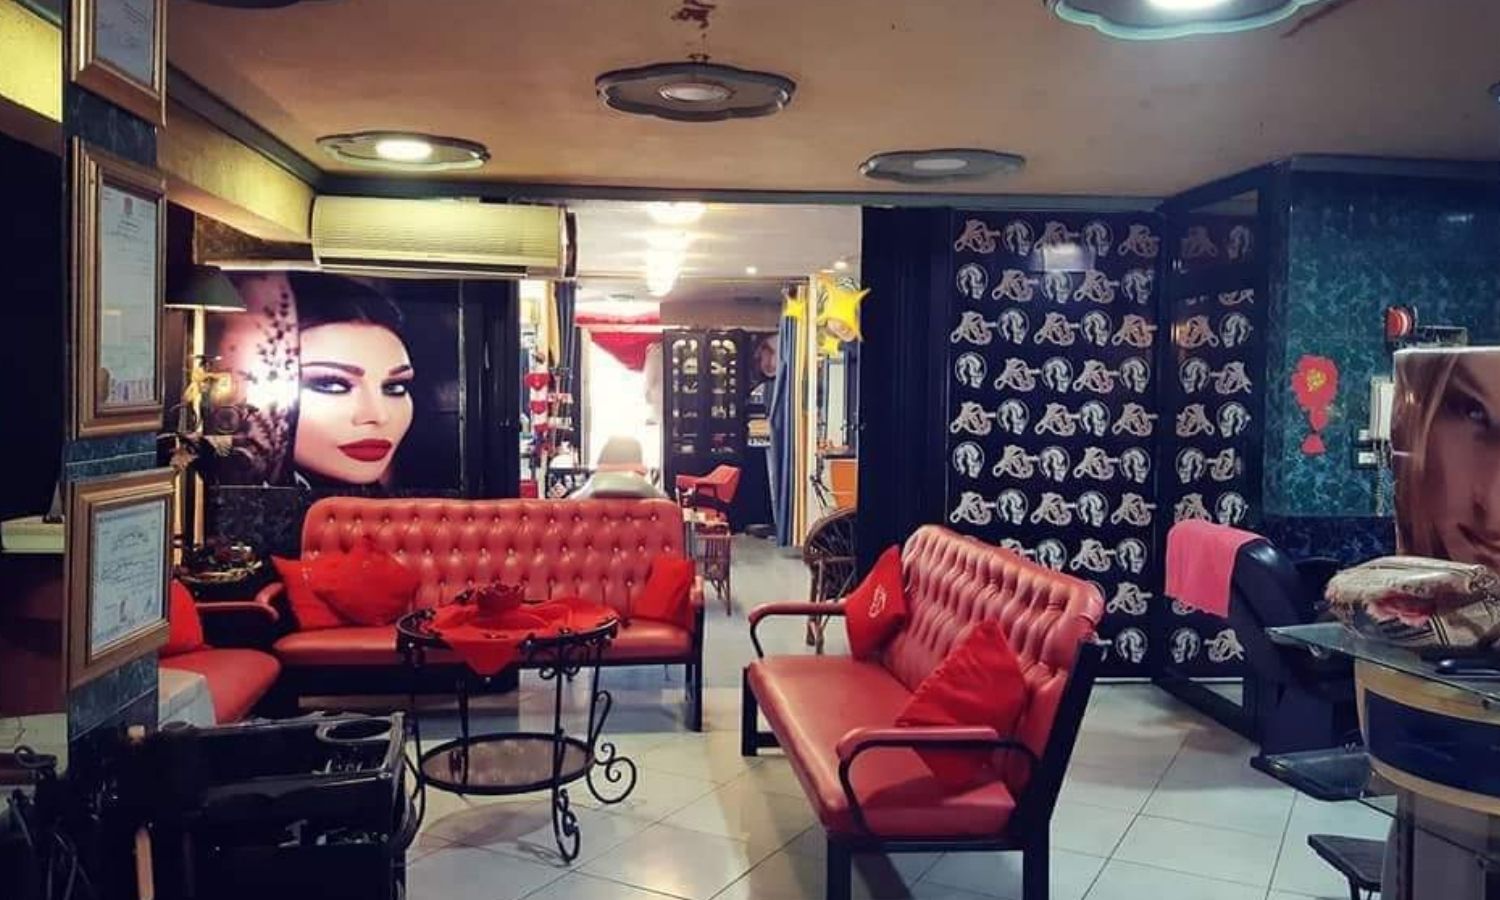 Women’s beauty and hairdressing salon in Latakia (Nails by Amora / Facebook)